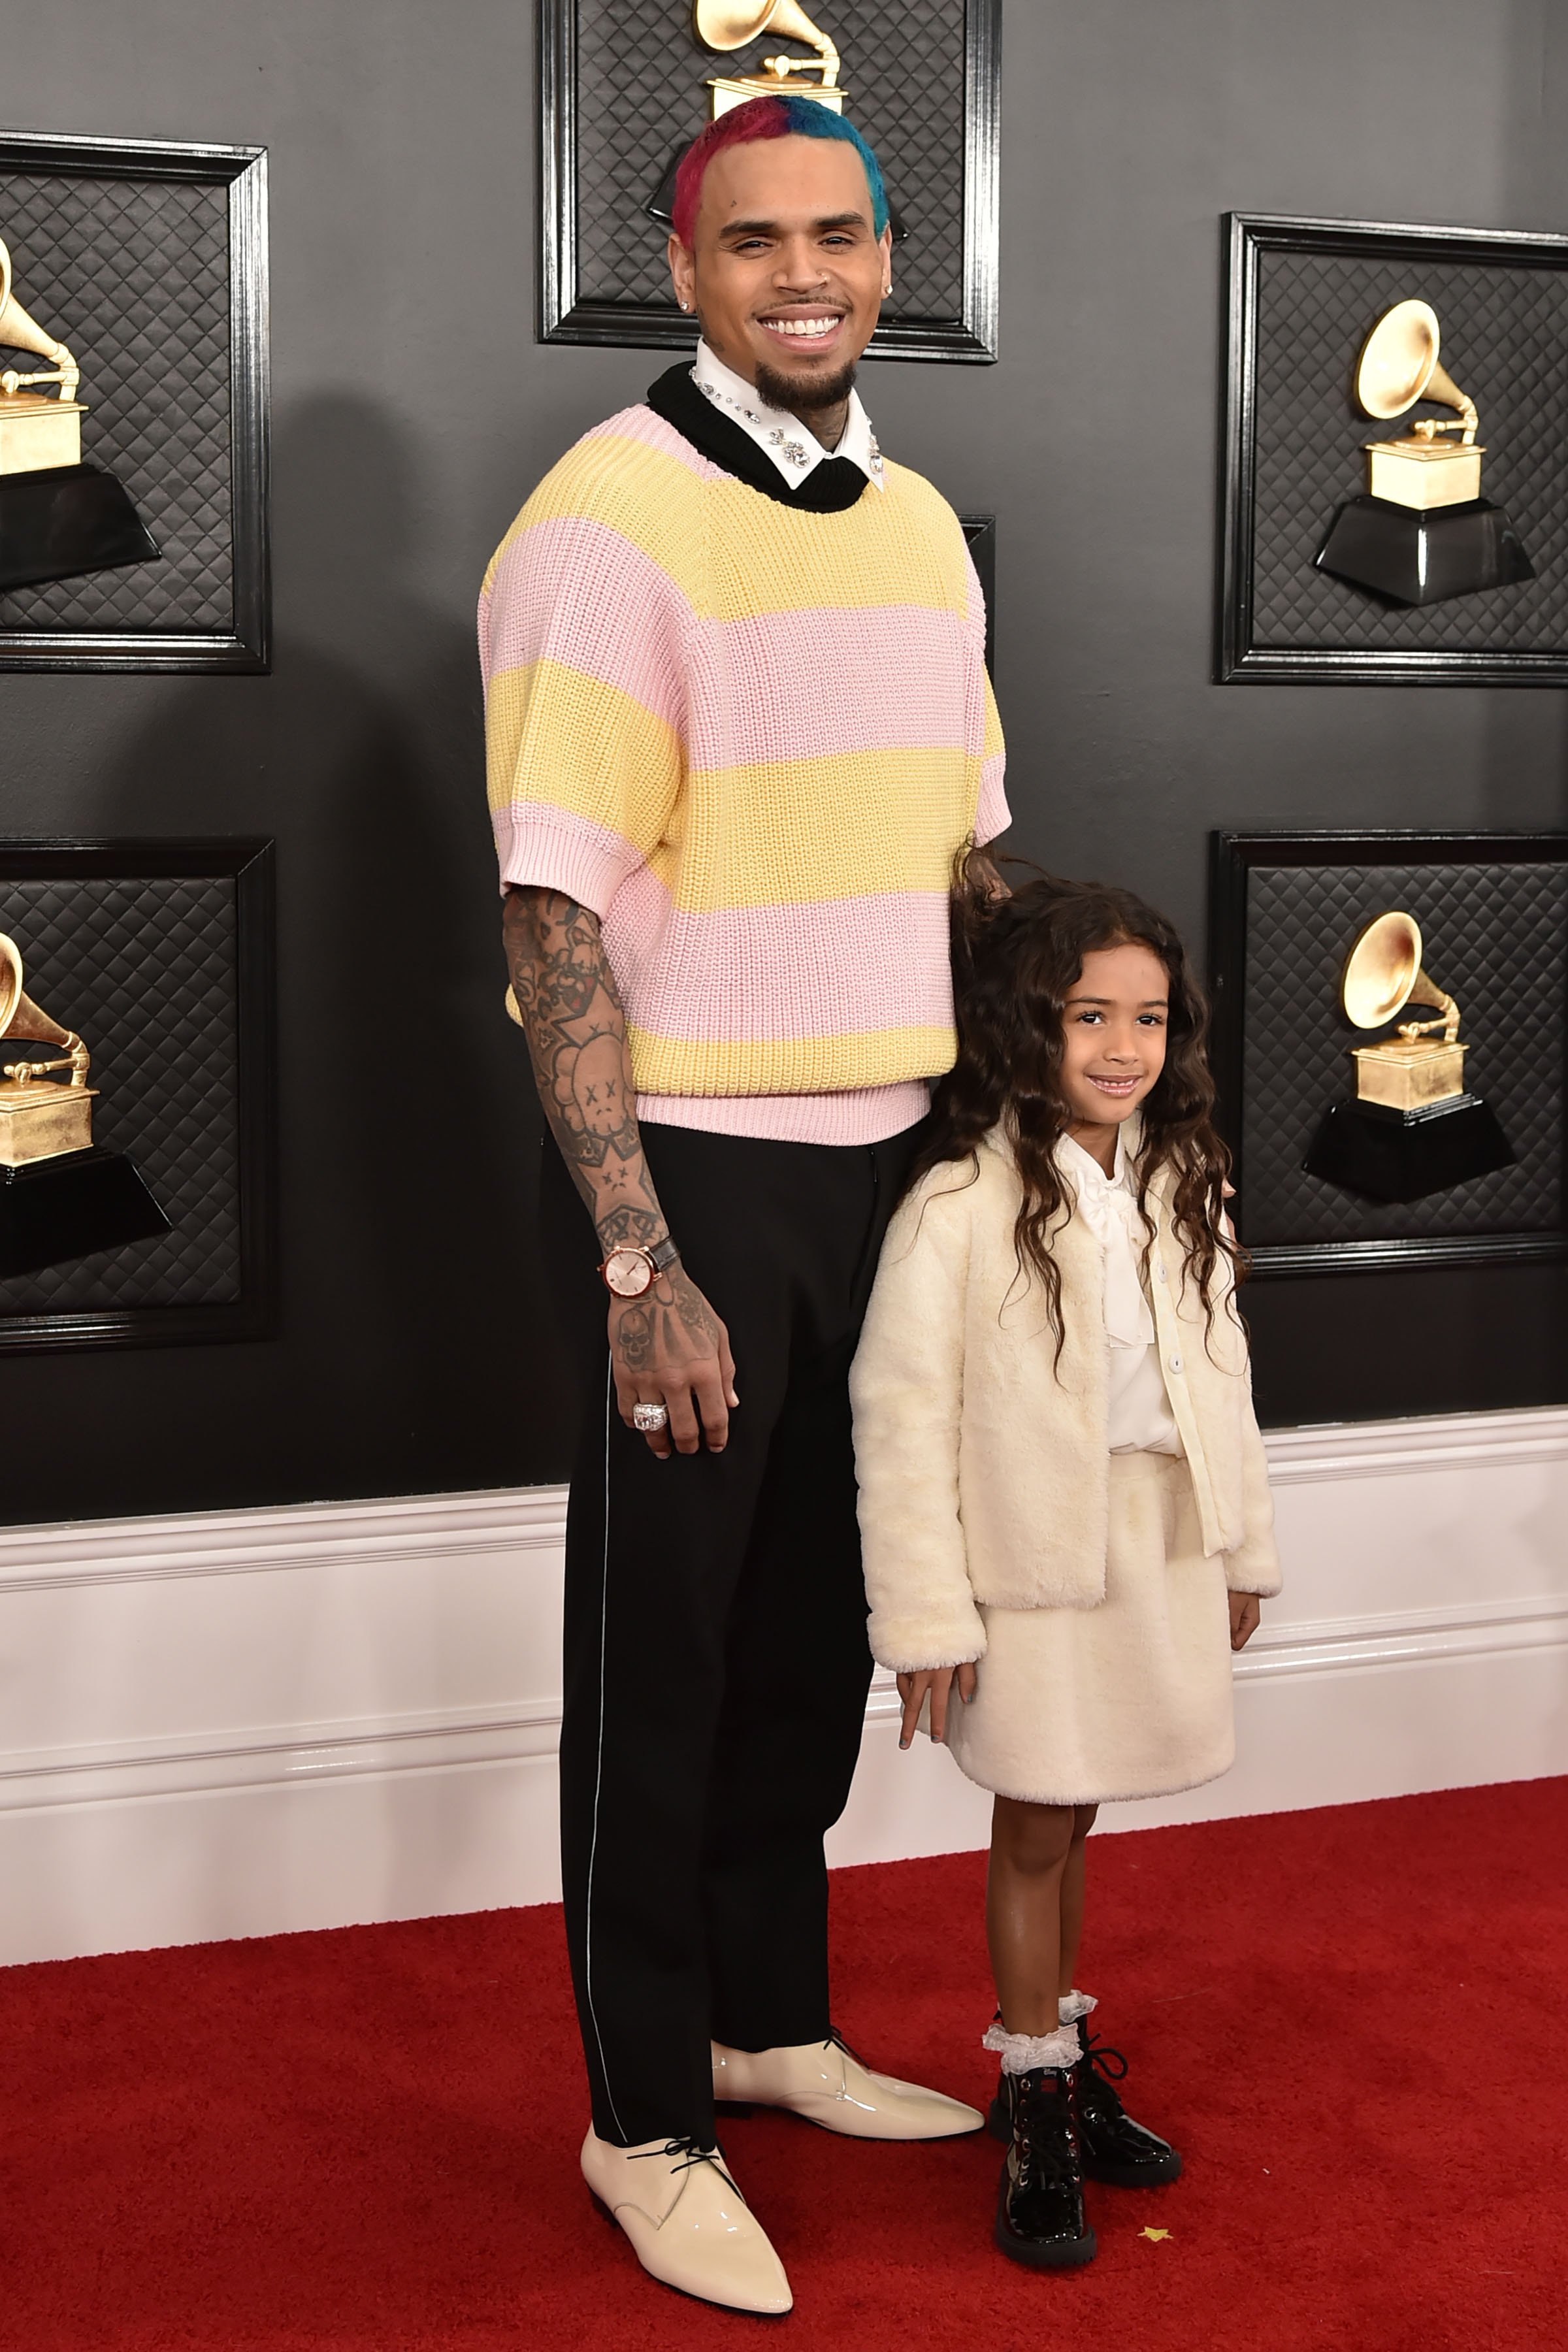 Chris Brown and Royalty Brown attend the 62nd Annual Grammy Awards at Staples Center in Los Angeles, CA. on January 26, 2020 | Photo: Getty Images